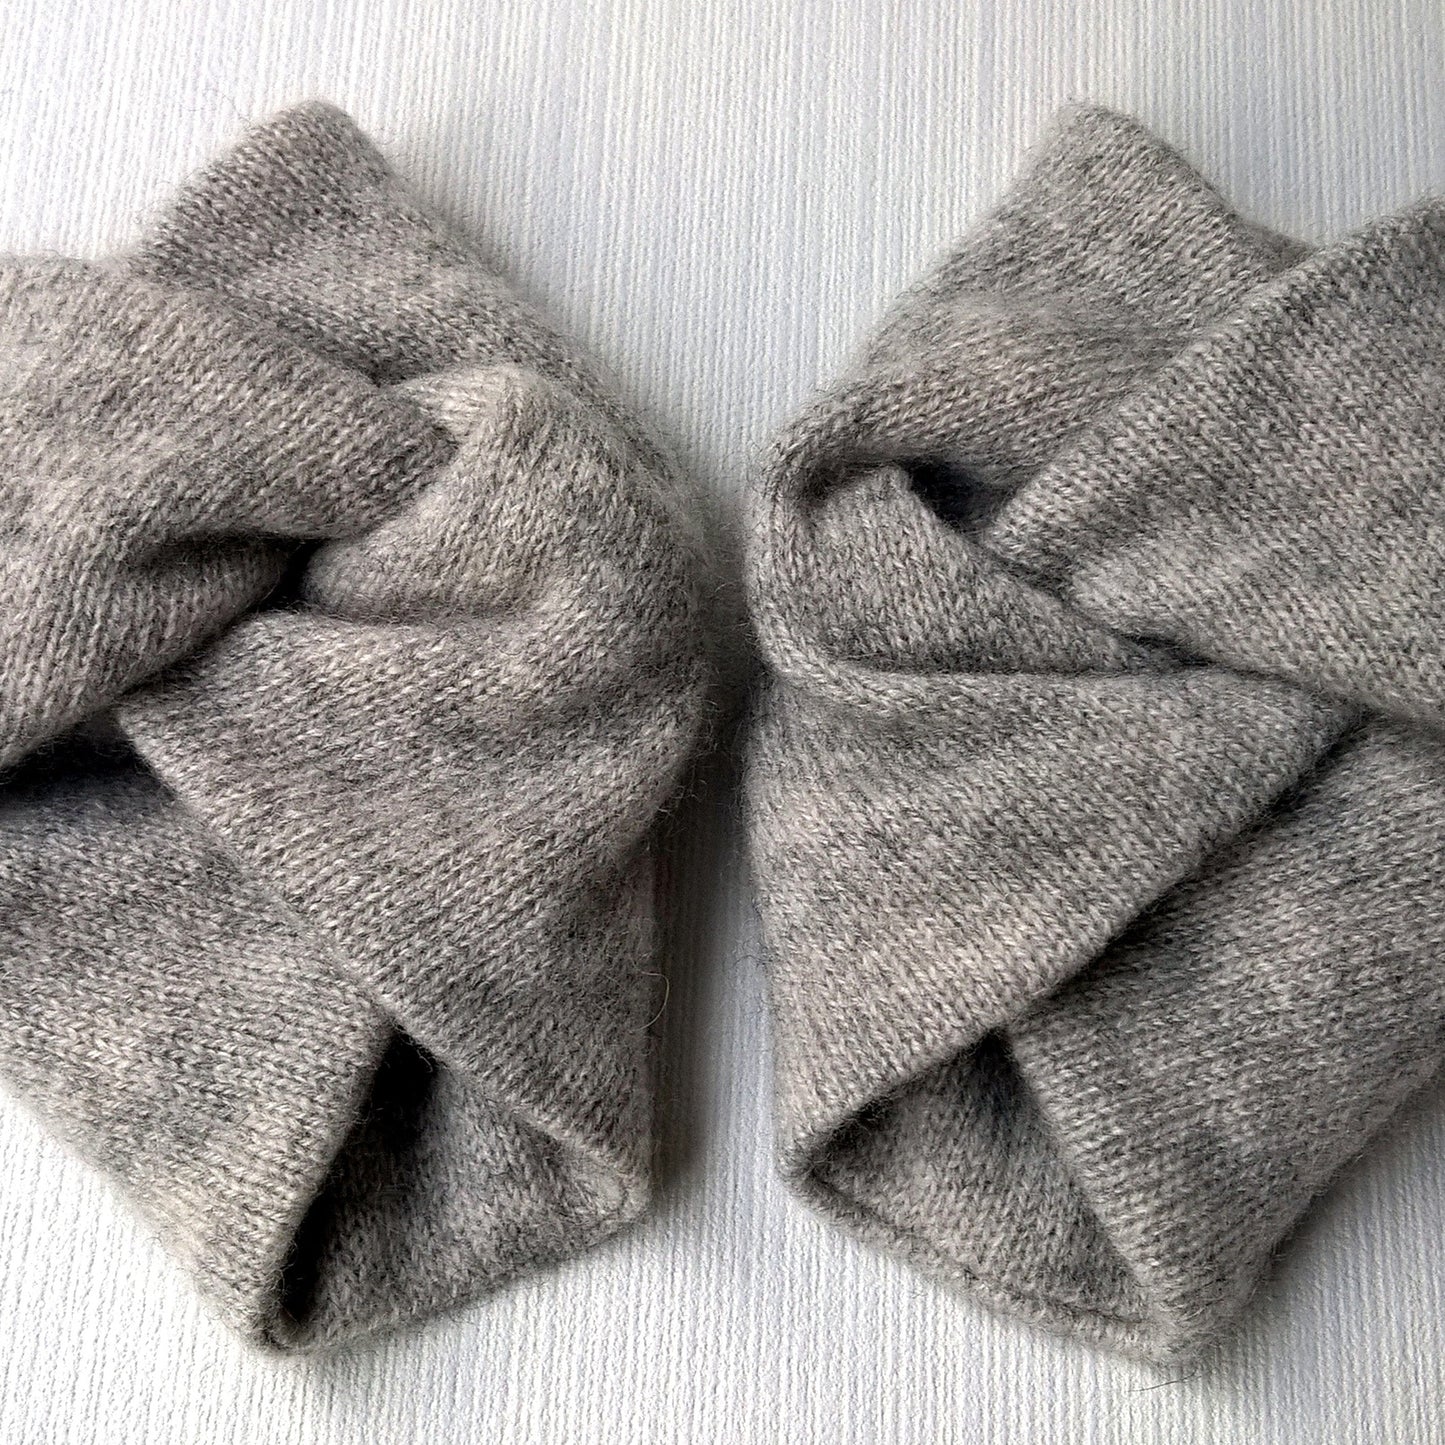 Double thickness handmade pure cashmere wrist warmers in light grey marl.